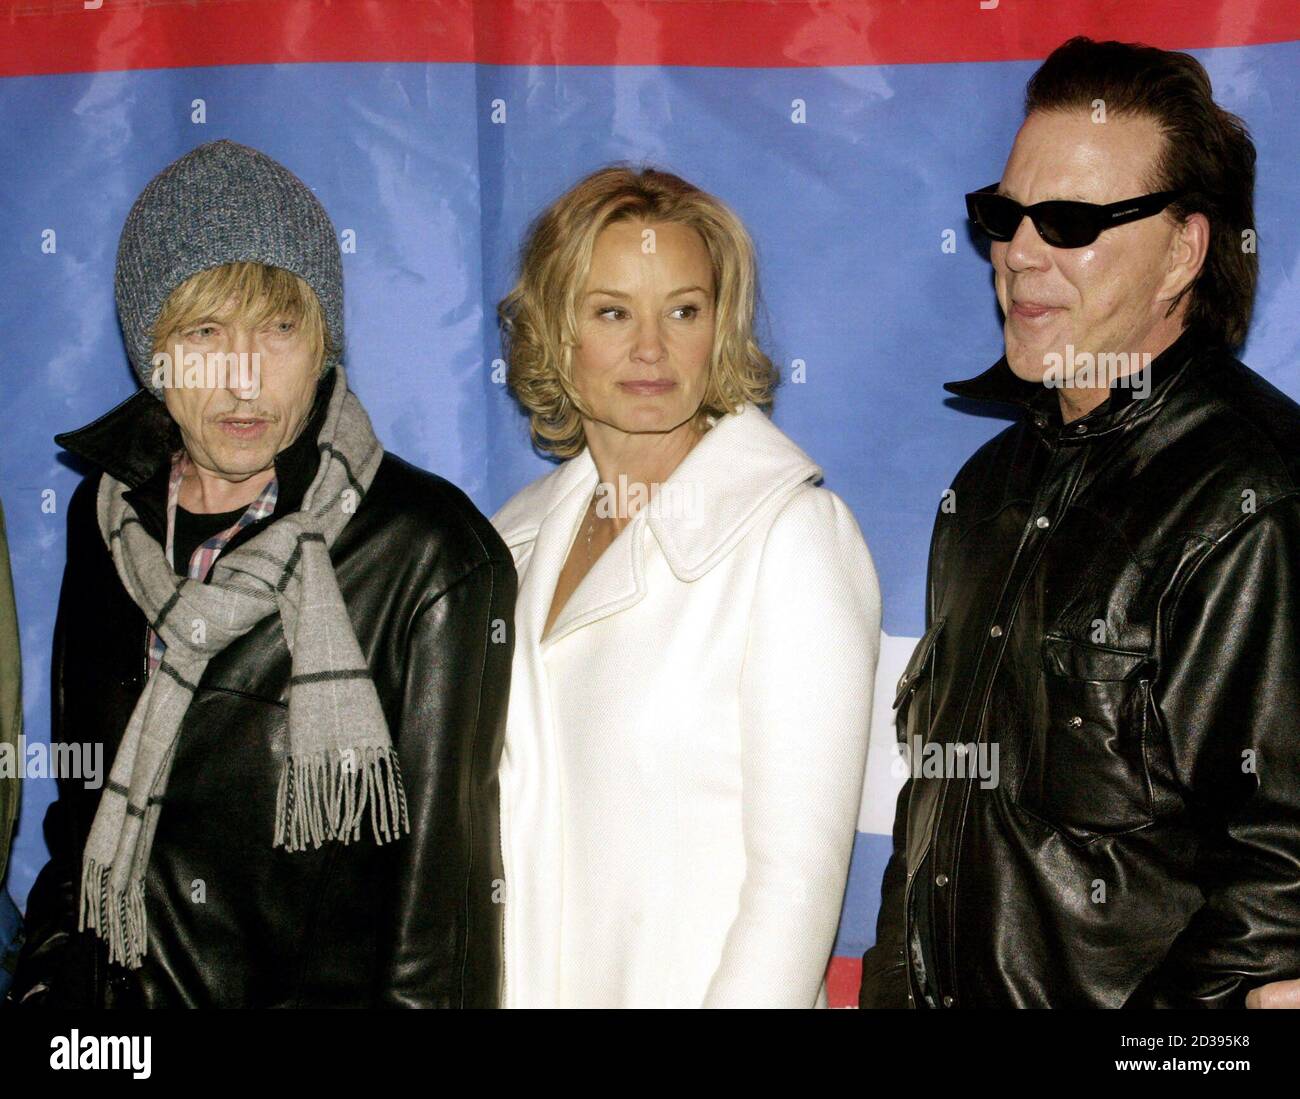 Cast of the film "Masked and Anonymous" (L-R) singer Bob Dylan, Jessica  Lange and Mickey Rourke pose during a photo call for the film in Park City,  Utah January 22, 2003 at